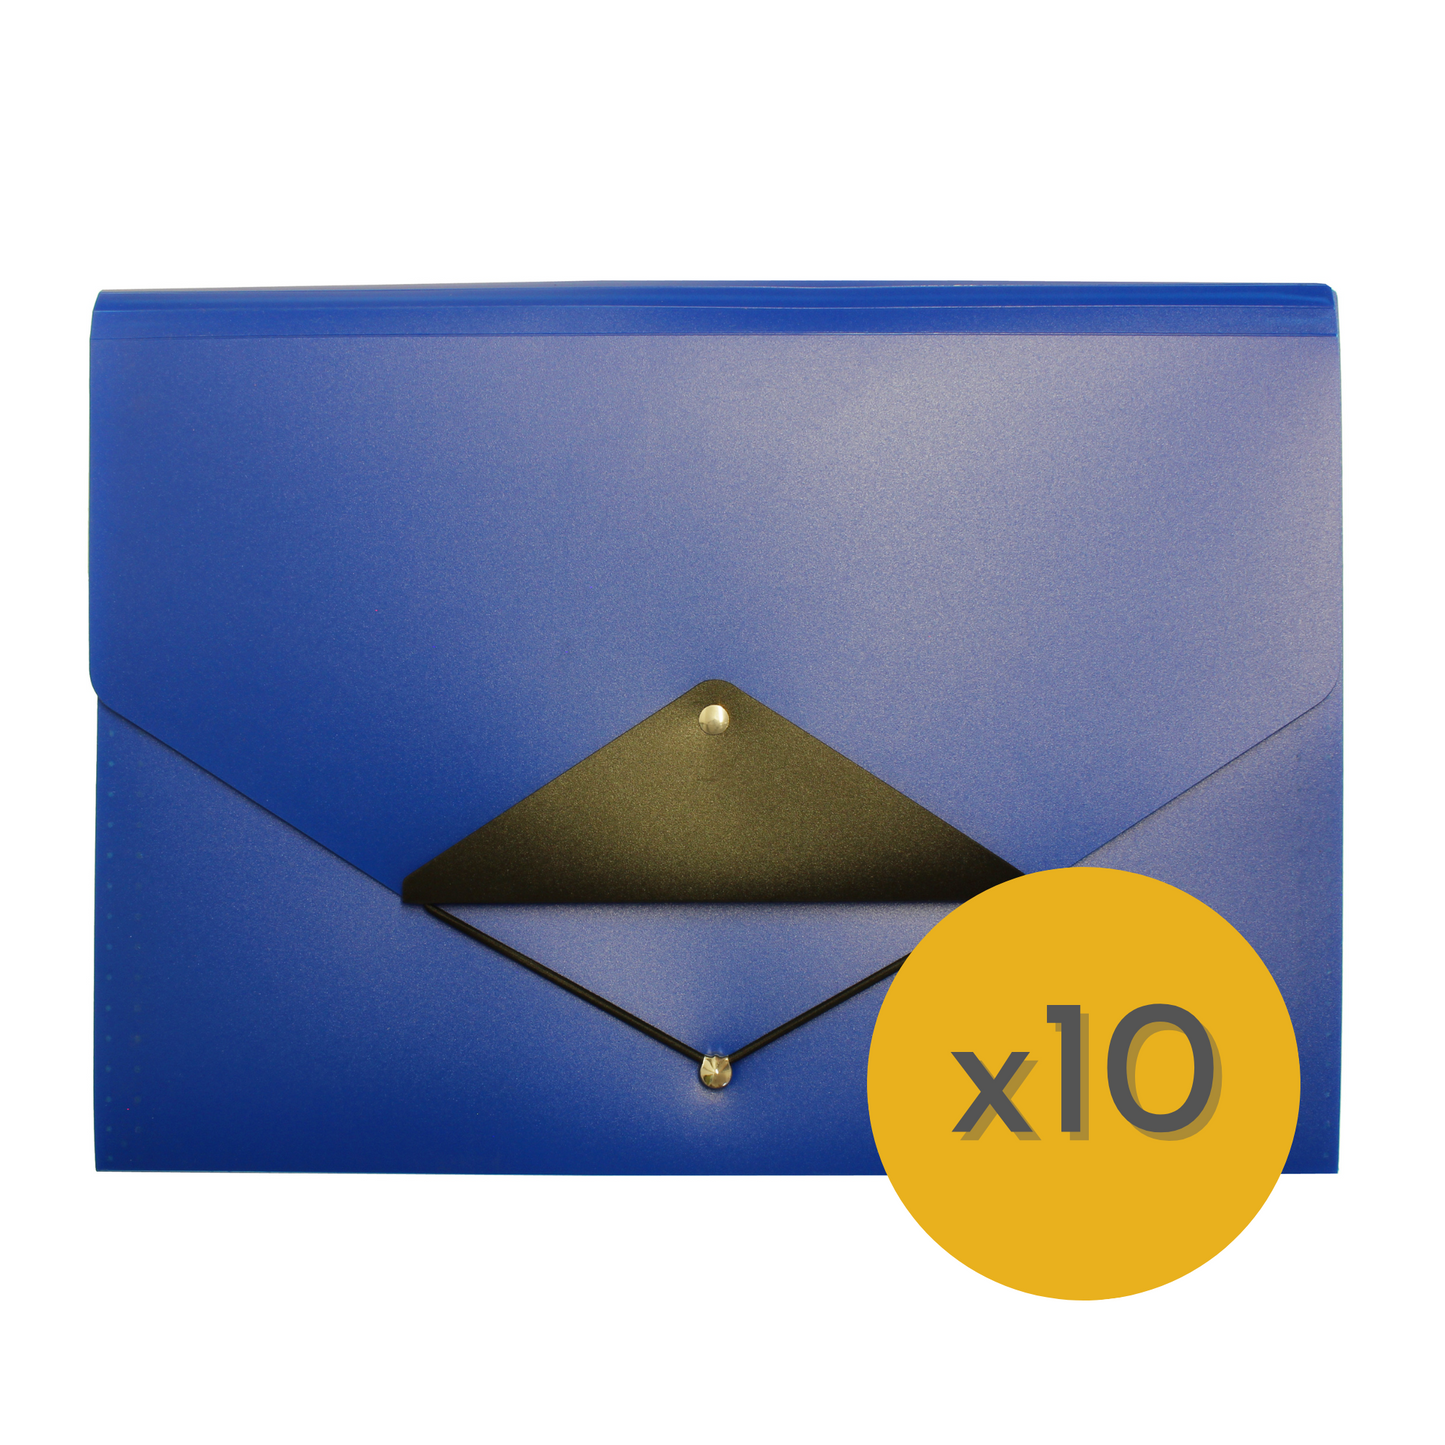 A blue polypropylene expanding file with a black elastic closure, accompanied by a yellow circle graphic with 'x10' indicating it is part of a value bundle.